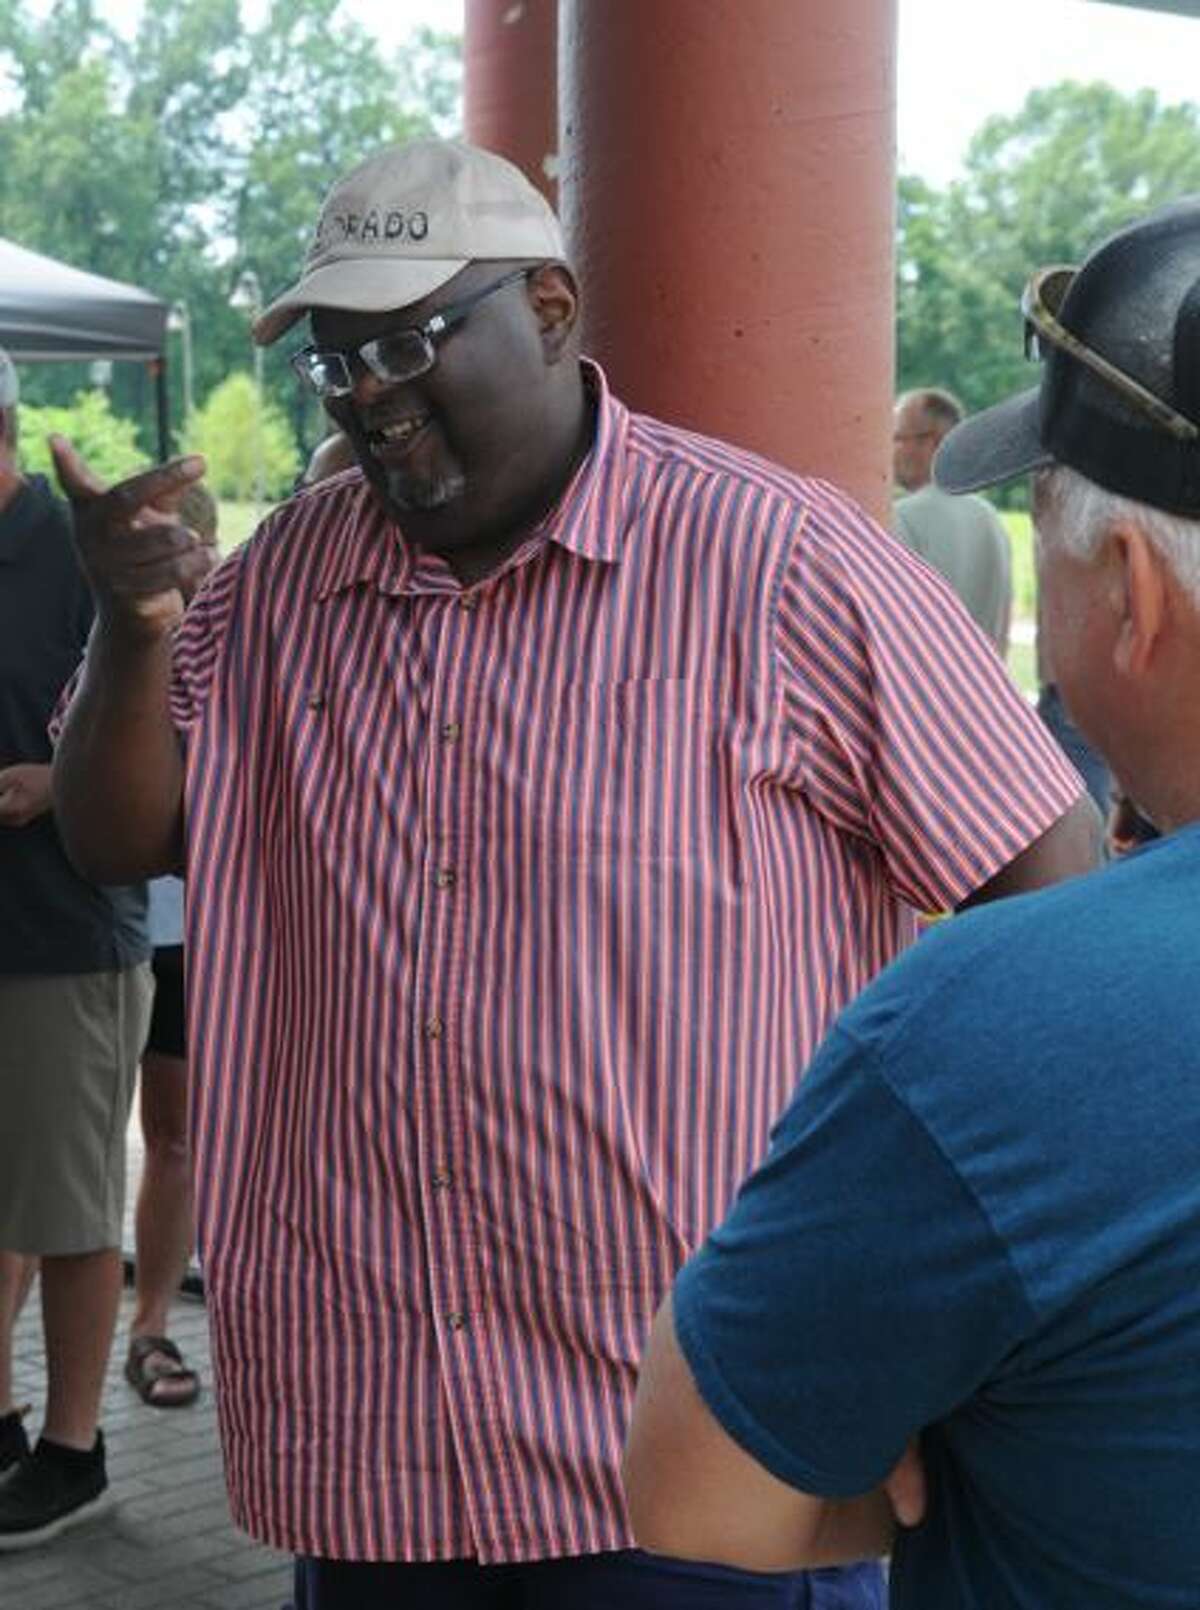 Greg Lowry of Jacksonville enjoys communicating with other visitors during Saturday's Deaf Picnic in Godfrey.